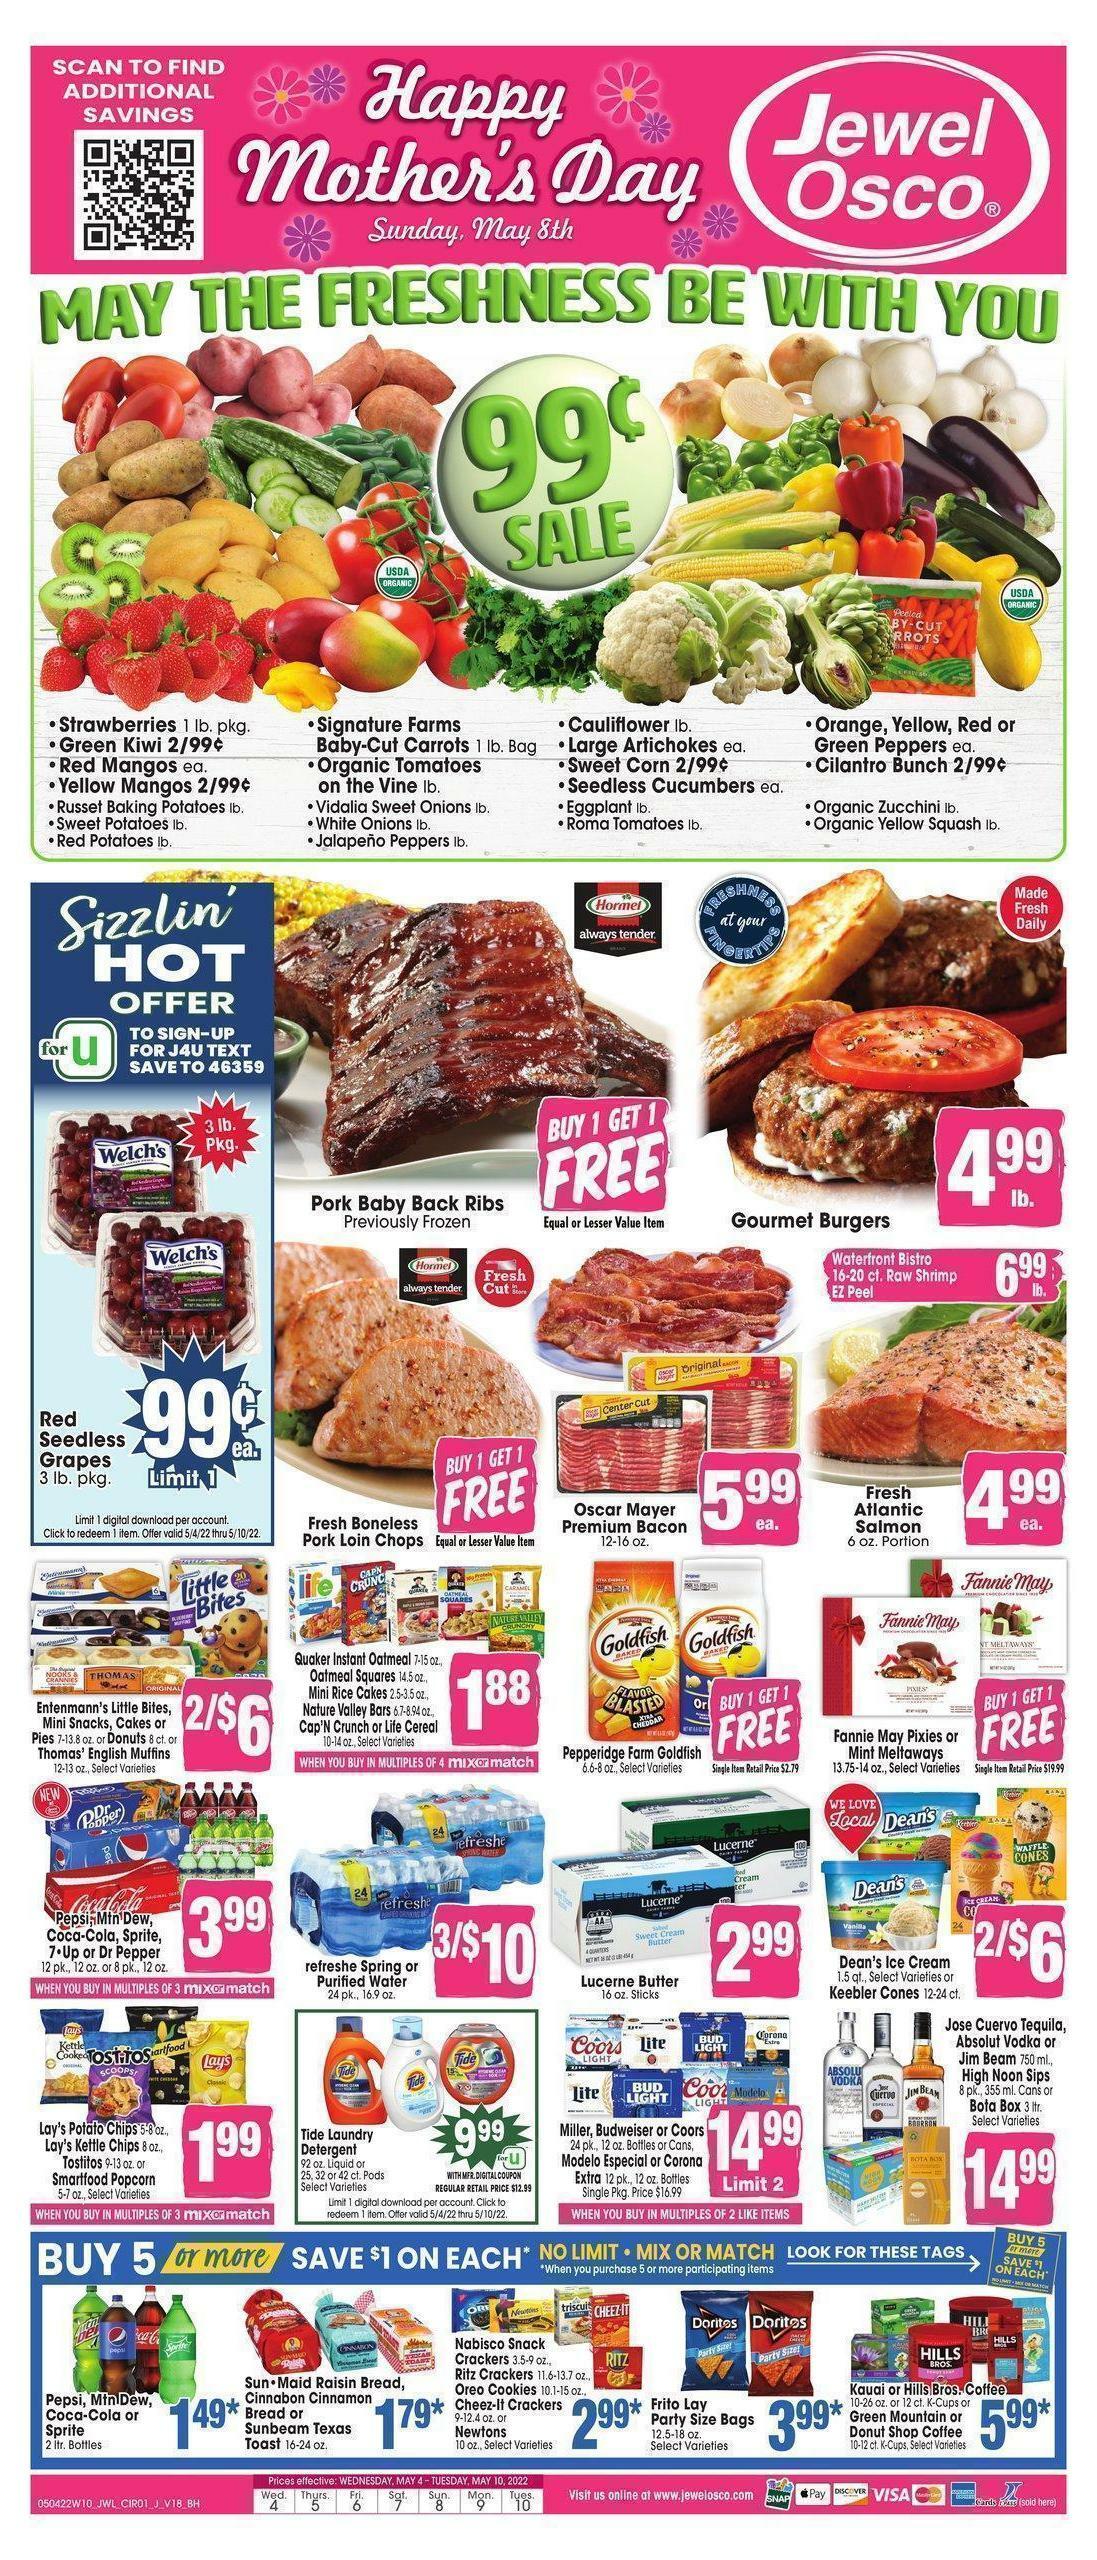 Jewel Osco Weekly Ad from May 4